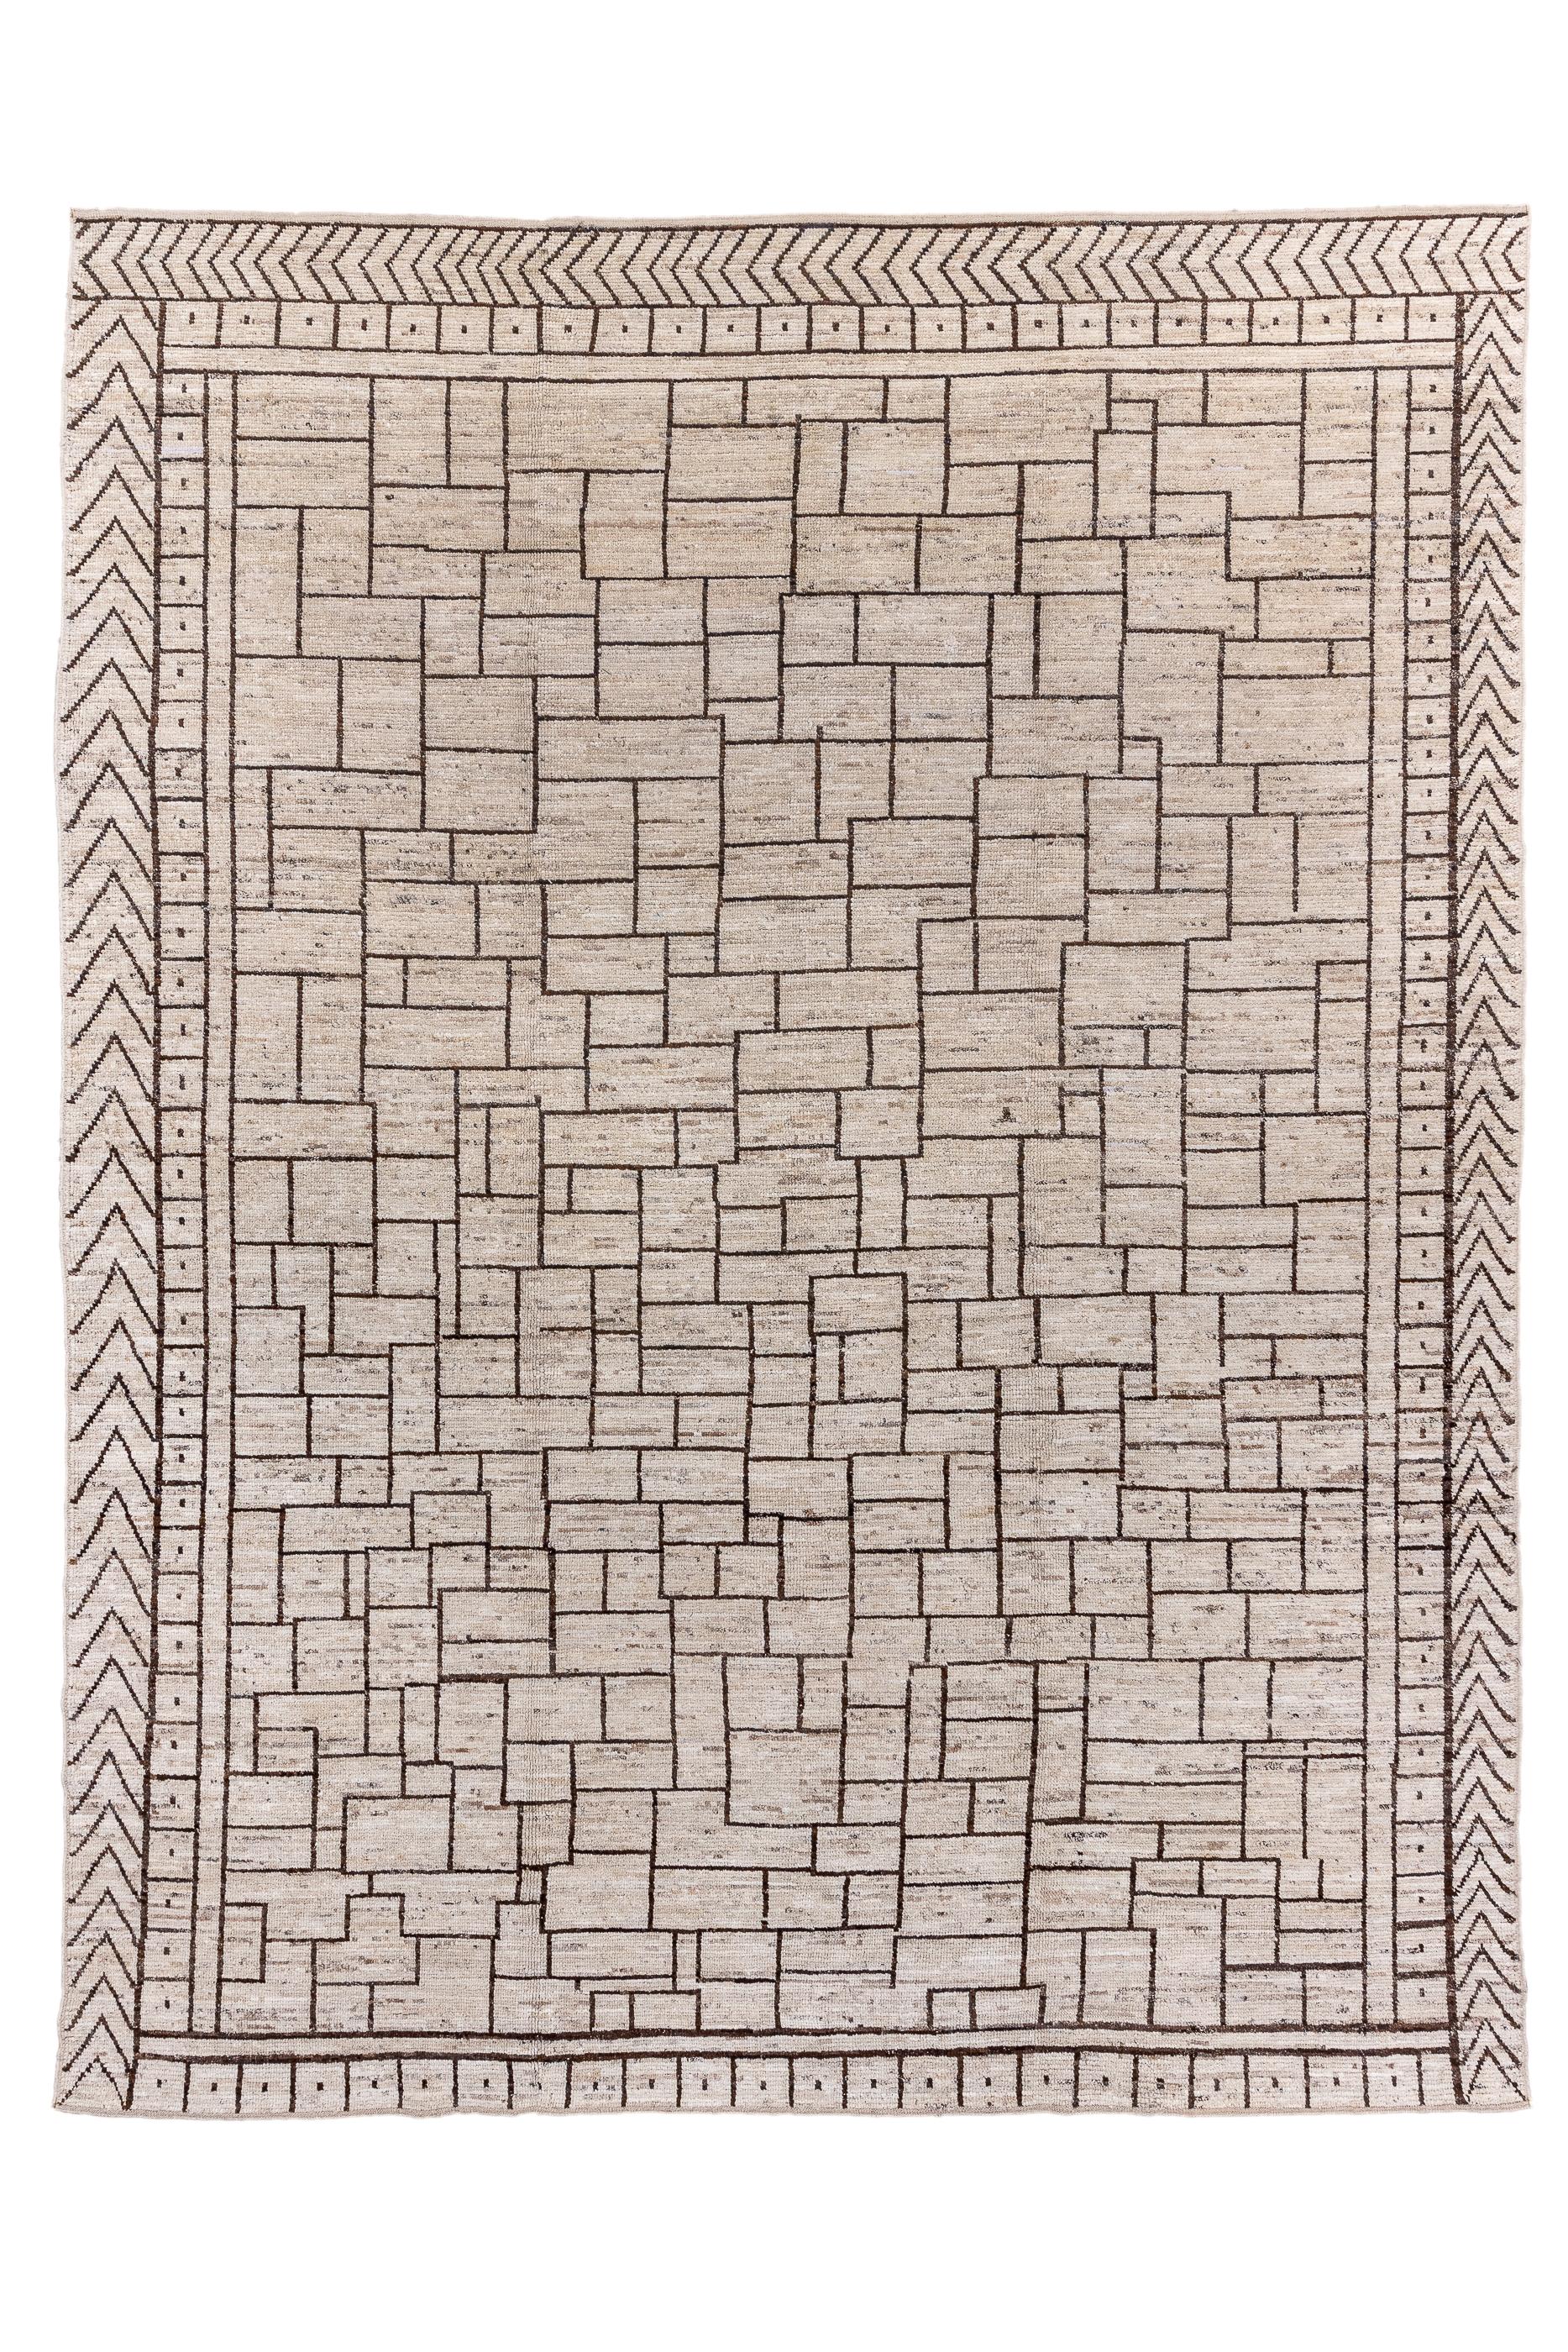 Room size Tulus are a recent innovation. Here the abrashed natural light tan field supports an allover, irregular brick, cracked ice pattern delineated in dark brown. The borders continue the palette but show a more regular inner band of equal